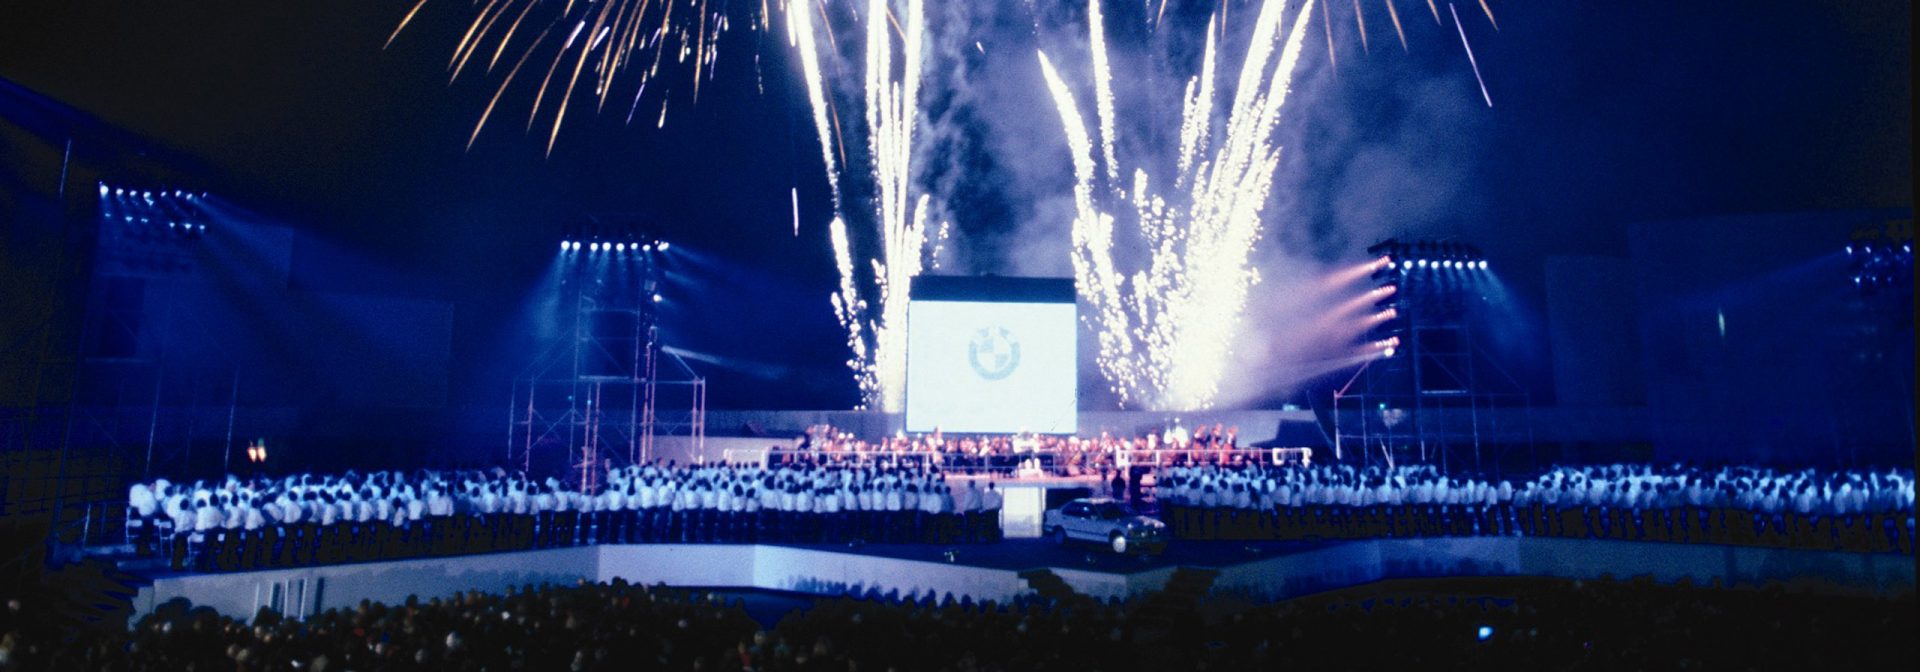 Opening ceremony event with fireworks and associates on stage with first car produced. 